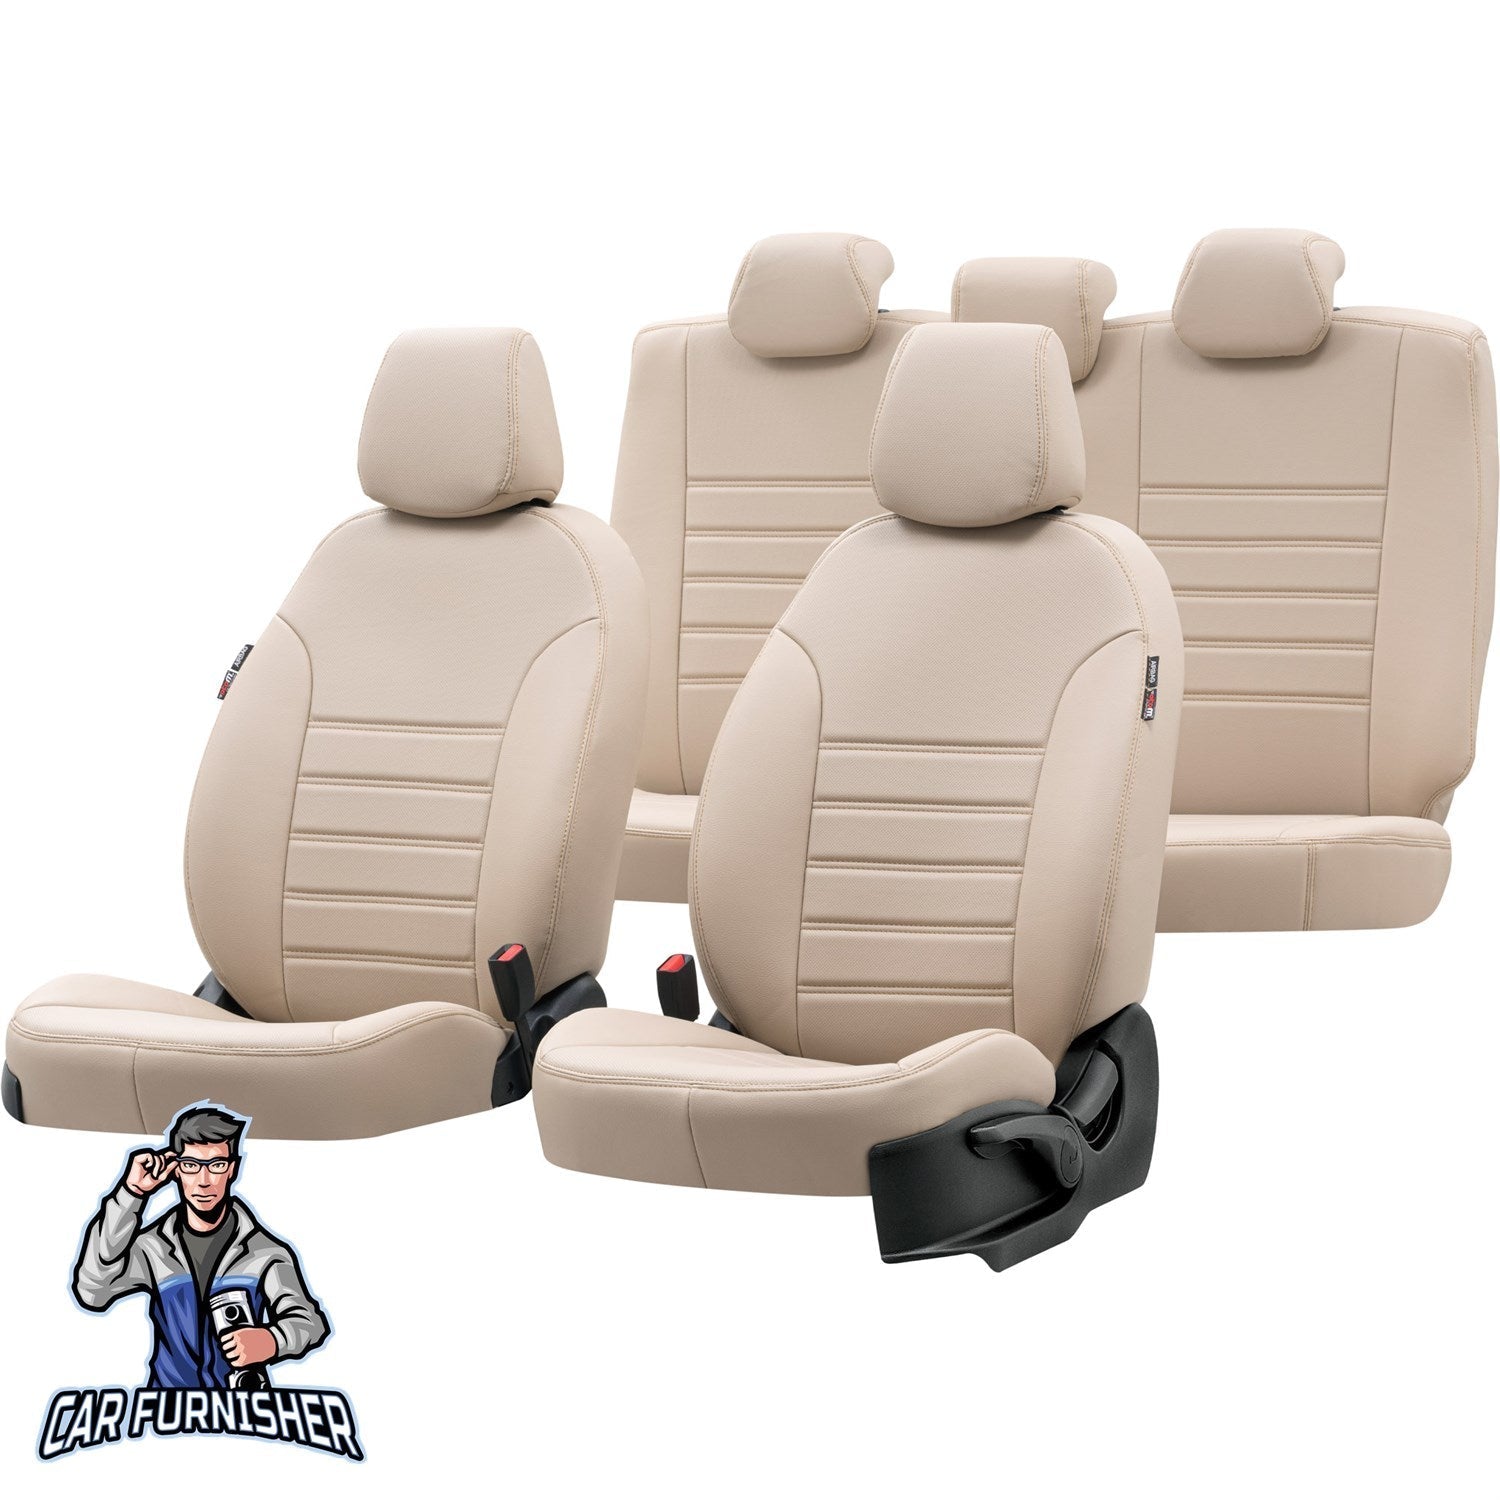 Kia Carens Seat Cover Istanbul Leather Design Beige Leather